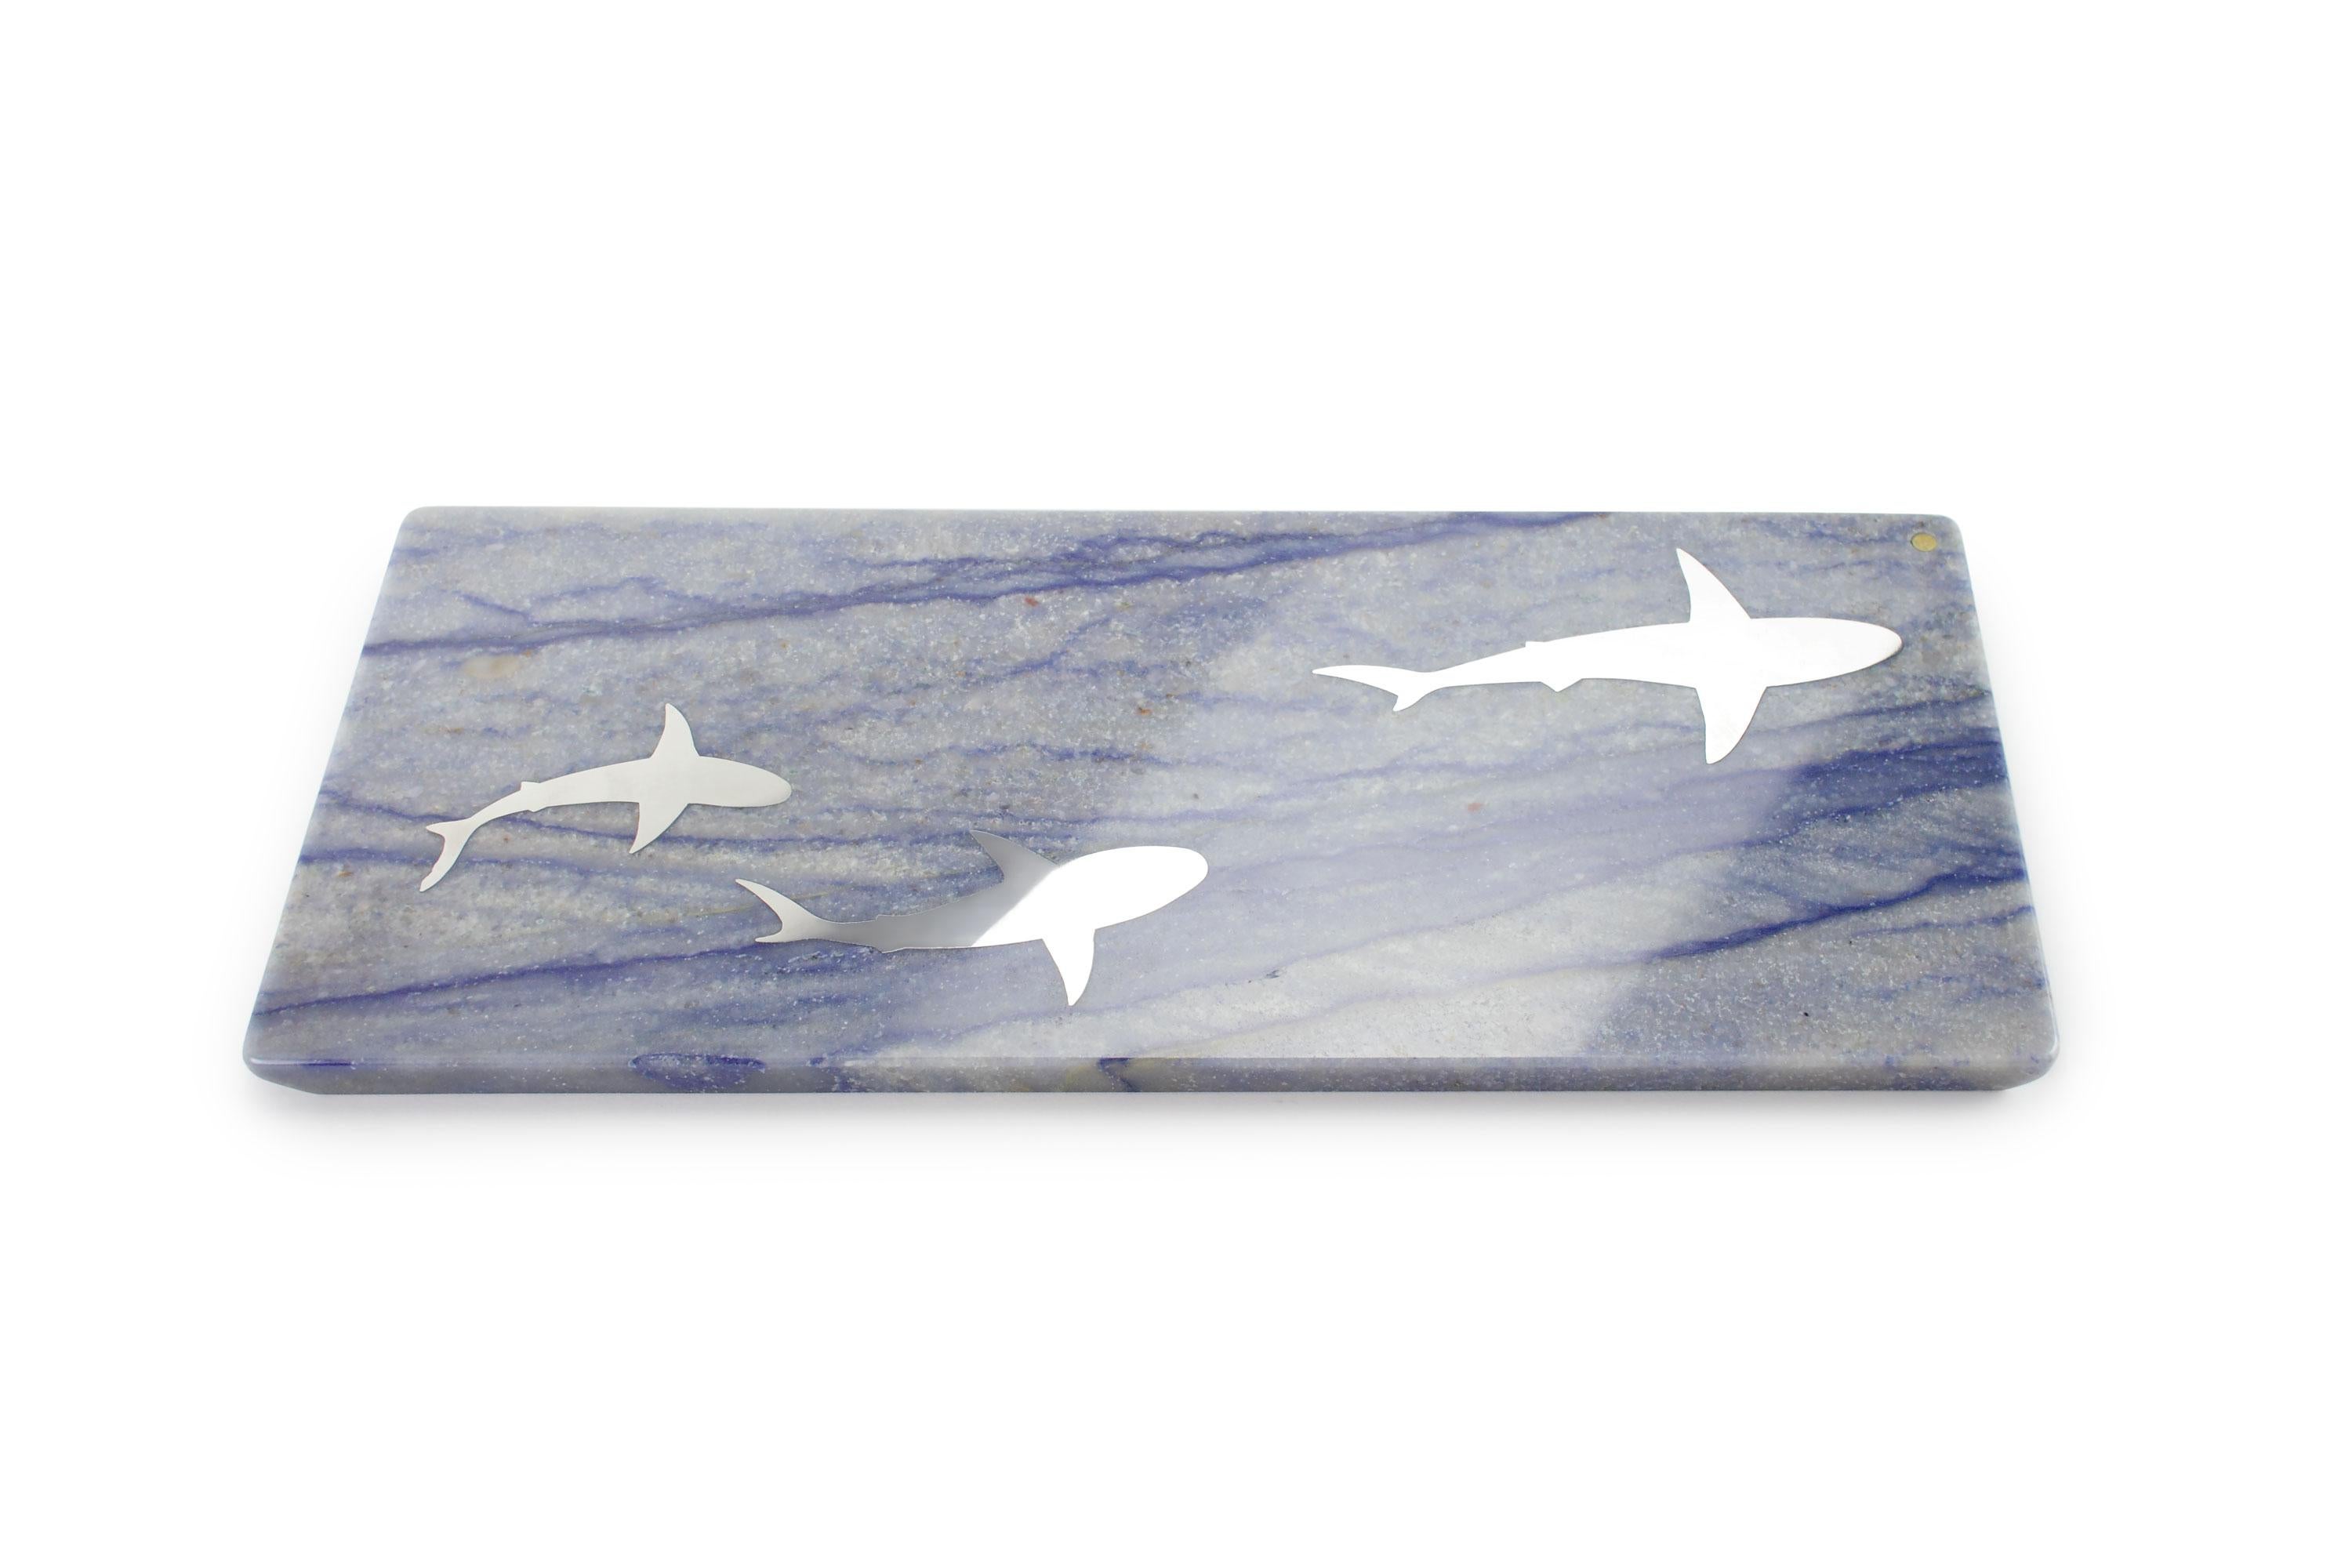 Important centerpiece / serving plate in semi-precious quartzite Azul Macaubas with stainless steel or white Carrara marble inlay.

Dimensions: Big - L 50 W 21.5 H 1.5 cm
Also available: Medium - L 45 W 12 H 1.5 cm

100% Hand made in Italy.

Marble